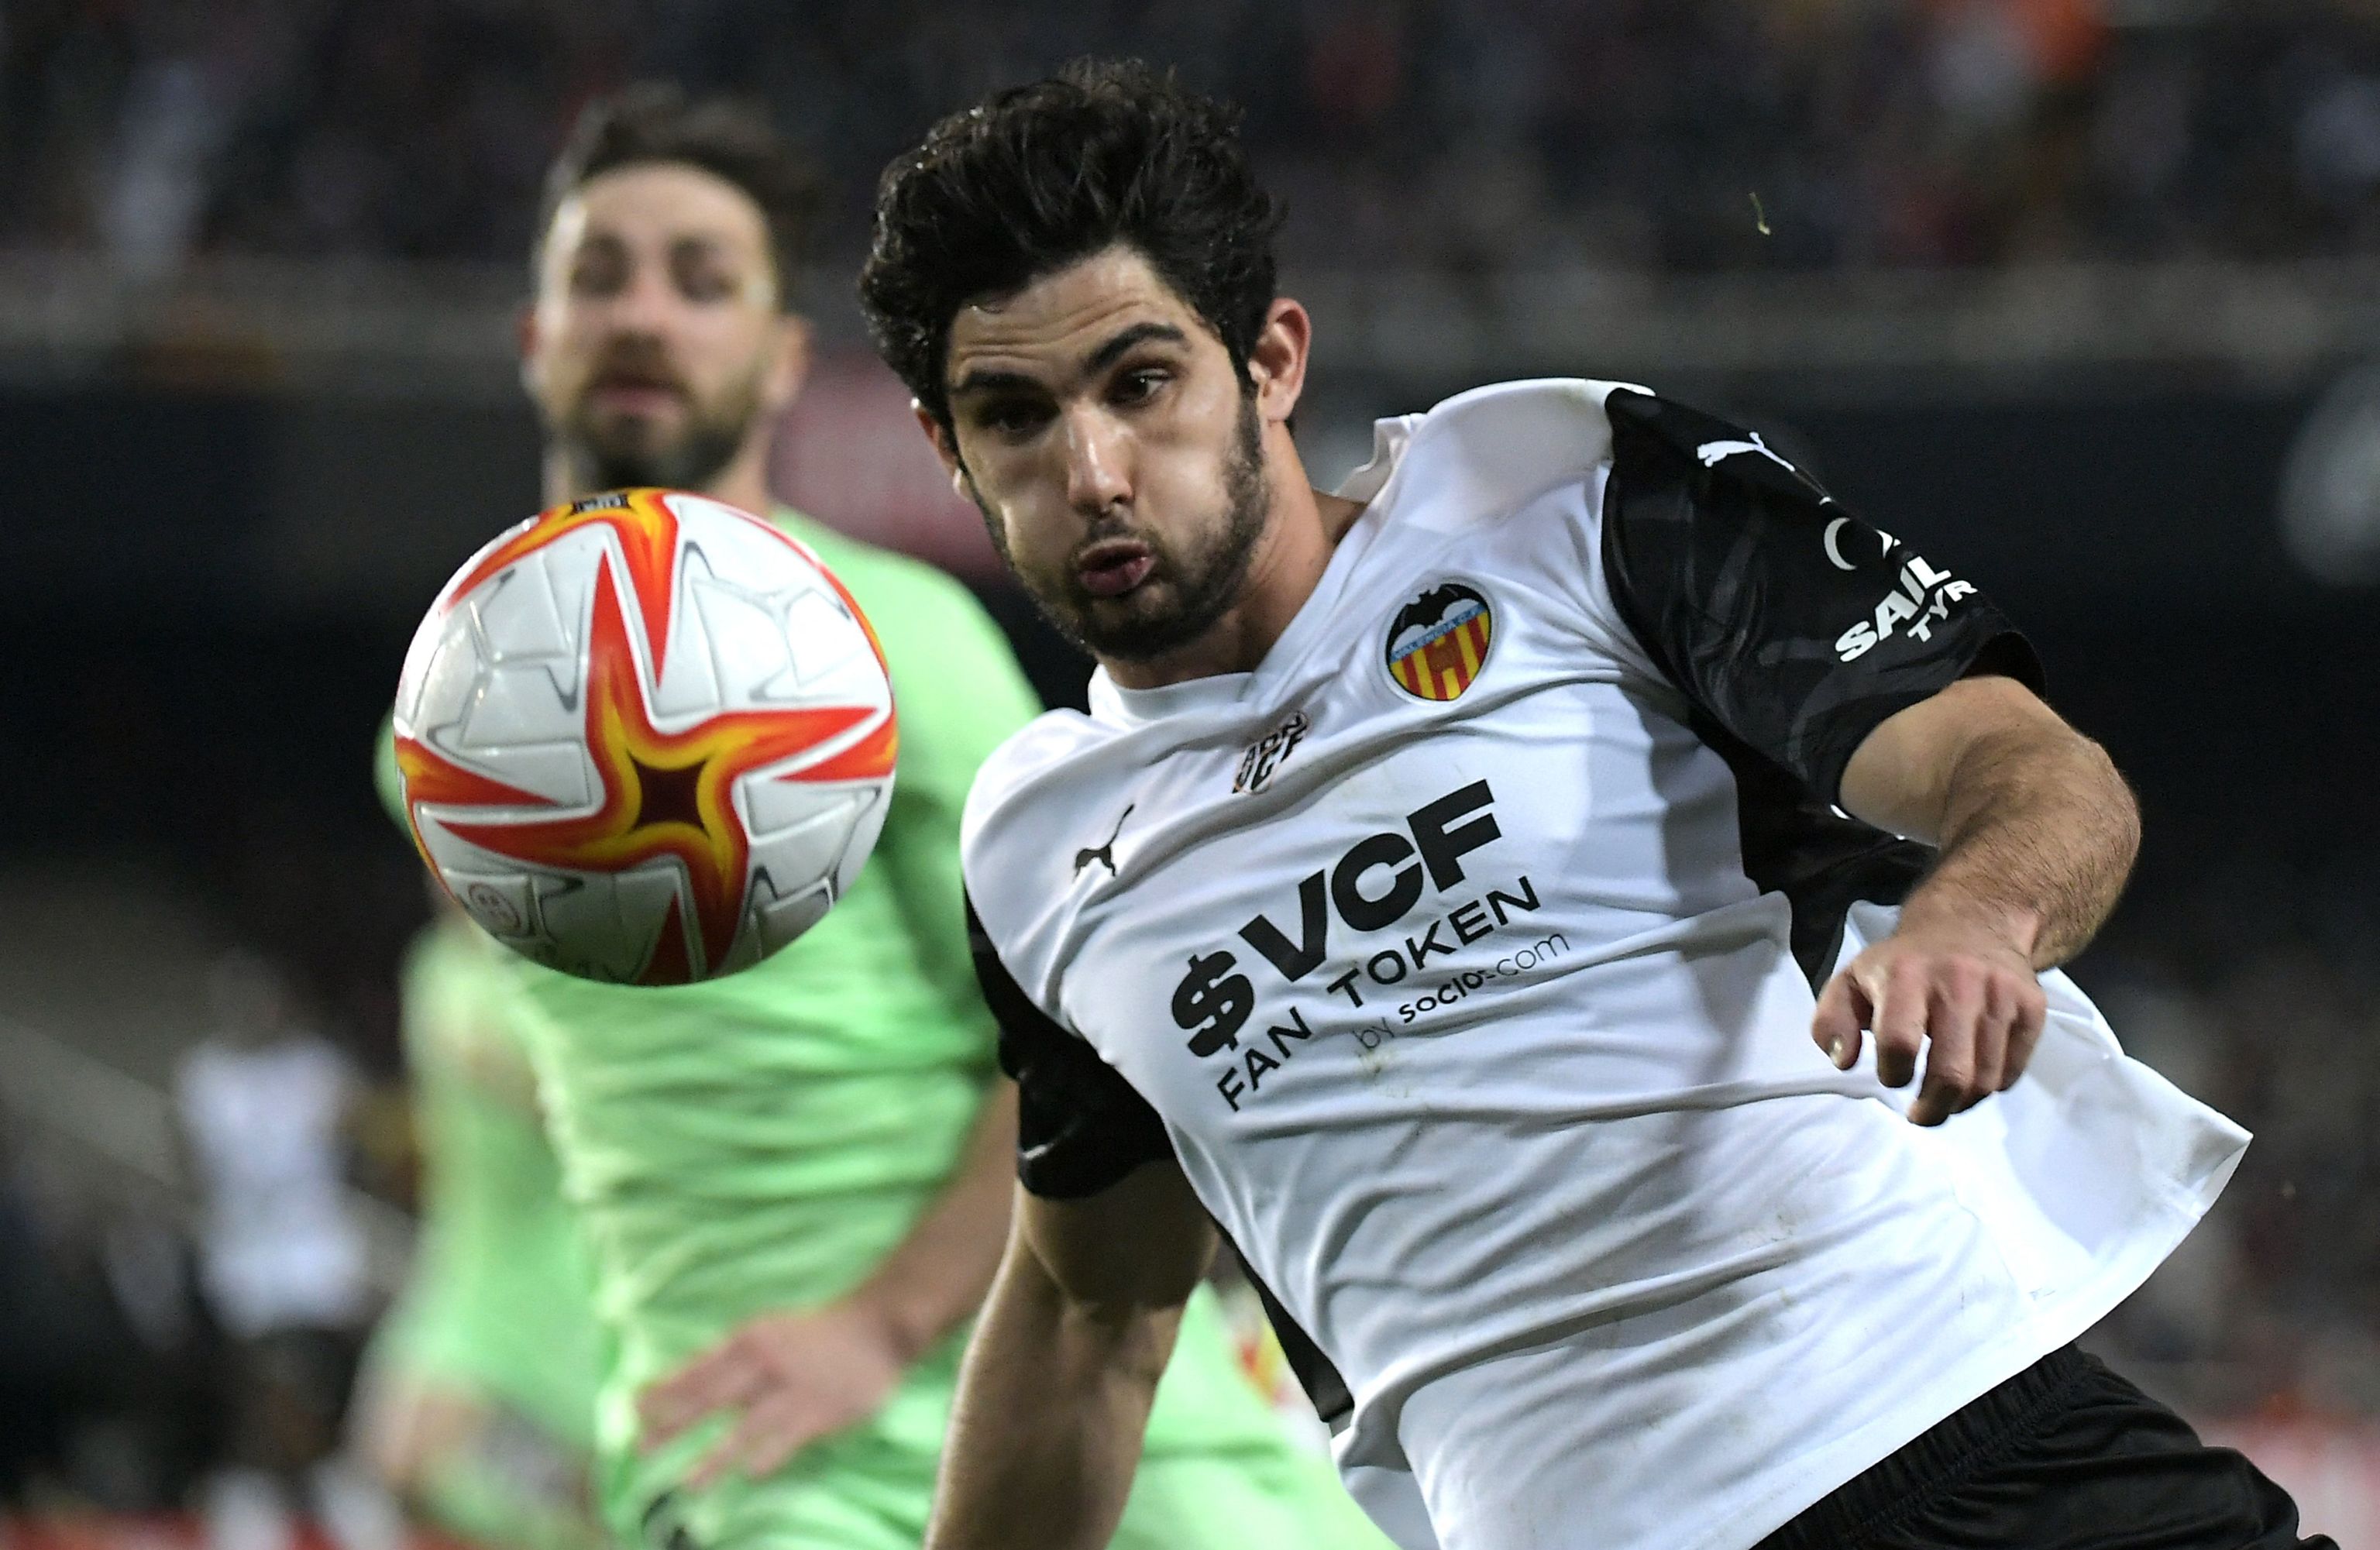 Valencia's Portuguese forward Goncalo  lt;HIT gt;Guedes lt;/HIT gt; eyes the ball during the Copa del Rey (King's Cup) semi final second leg football match between Valencia CF and Athletic Club Bilbao at the Mestalla stadium in Valencia on March 2, 2022. (Photo by JOSE JORDAN / AFP)